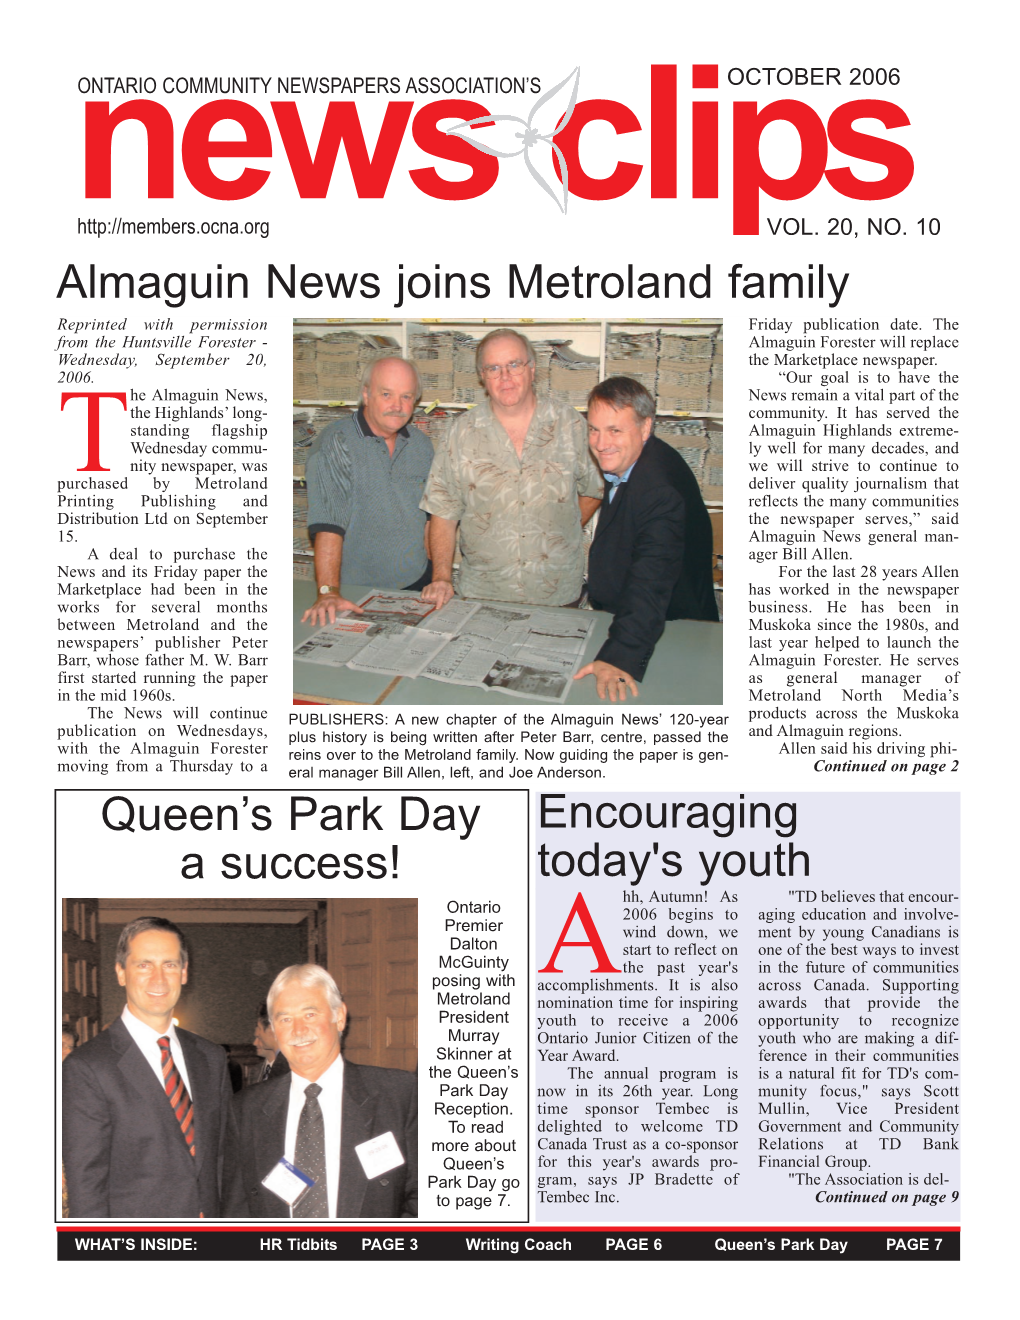 Almaguin News Joins Metroland Family Queen's Park Day a Success